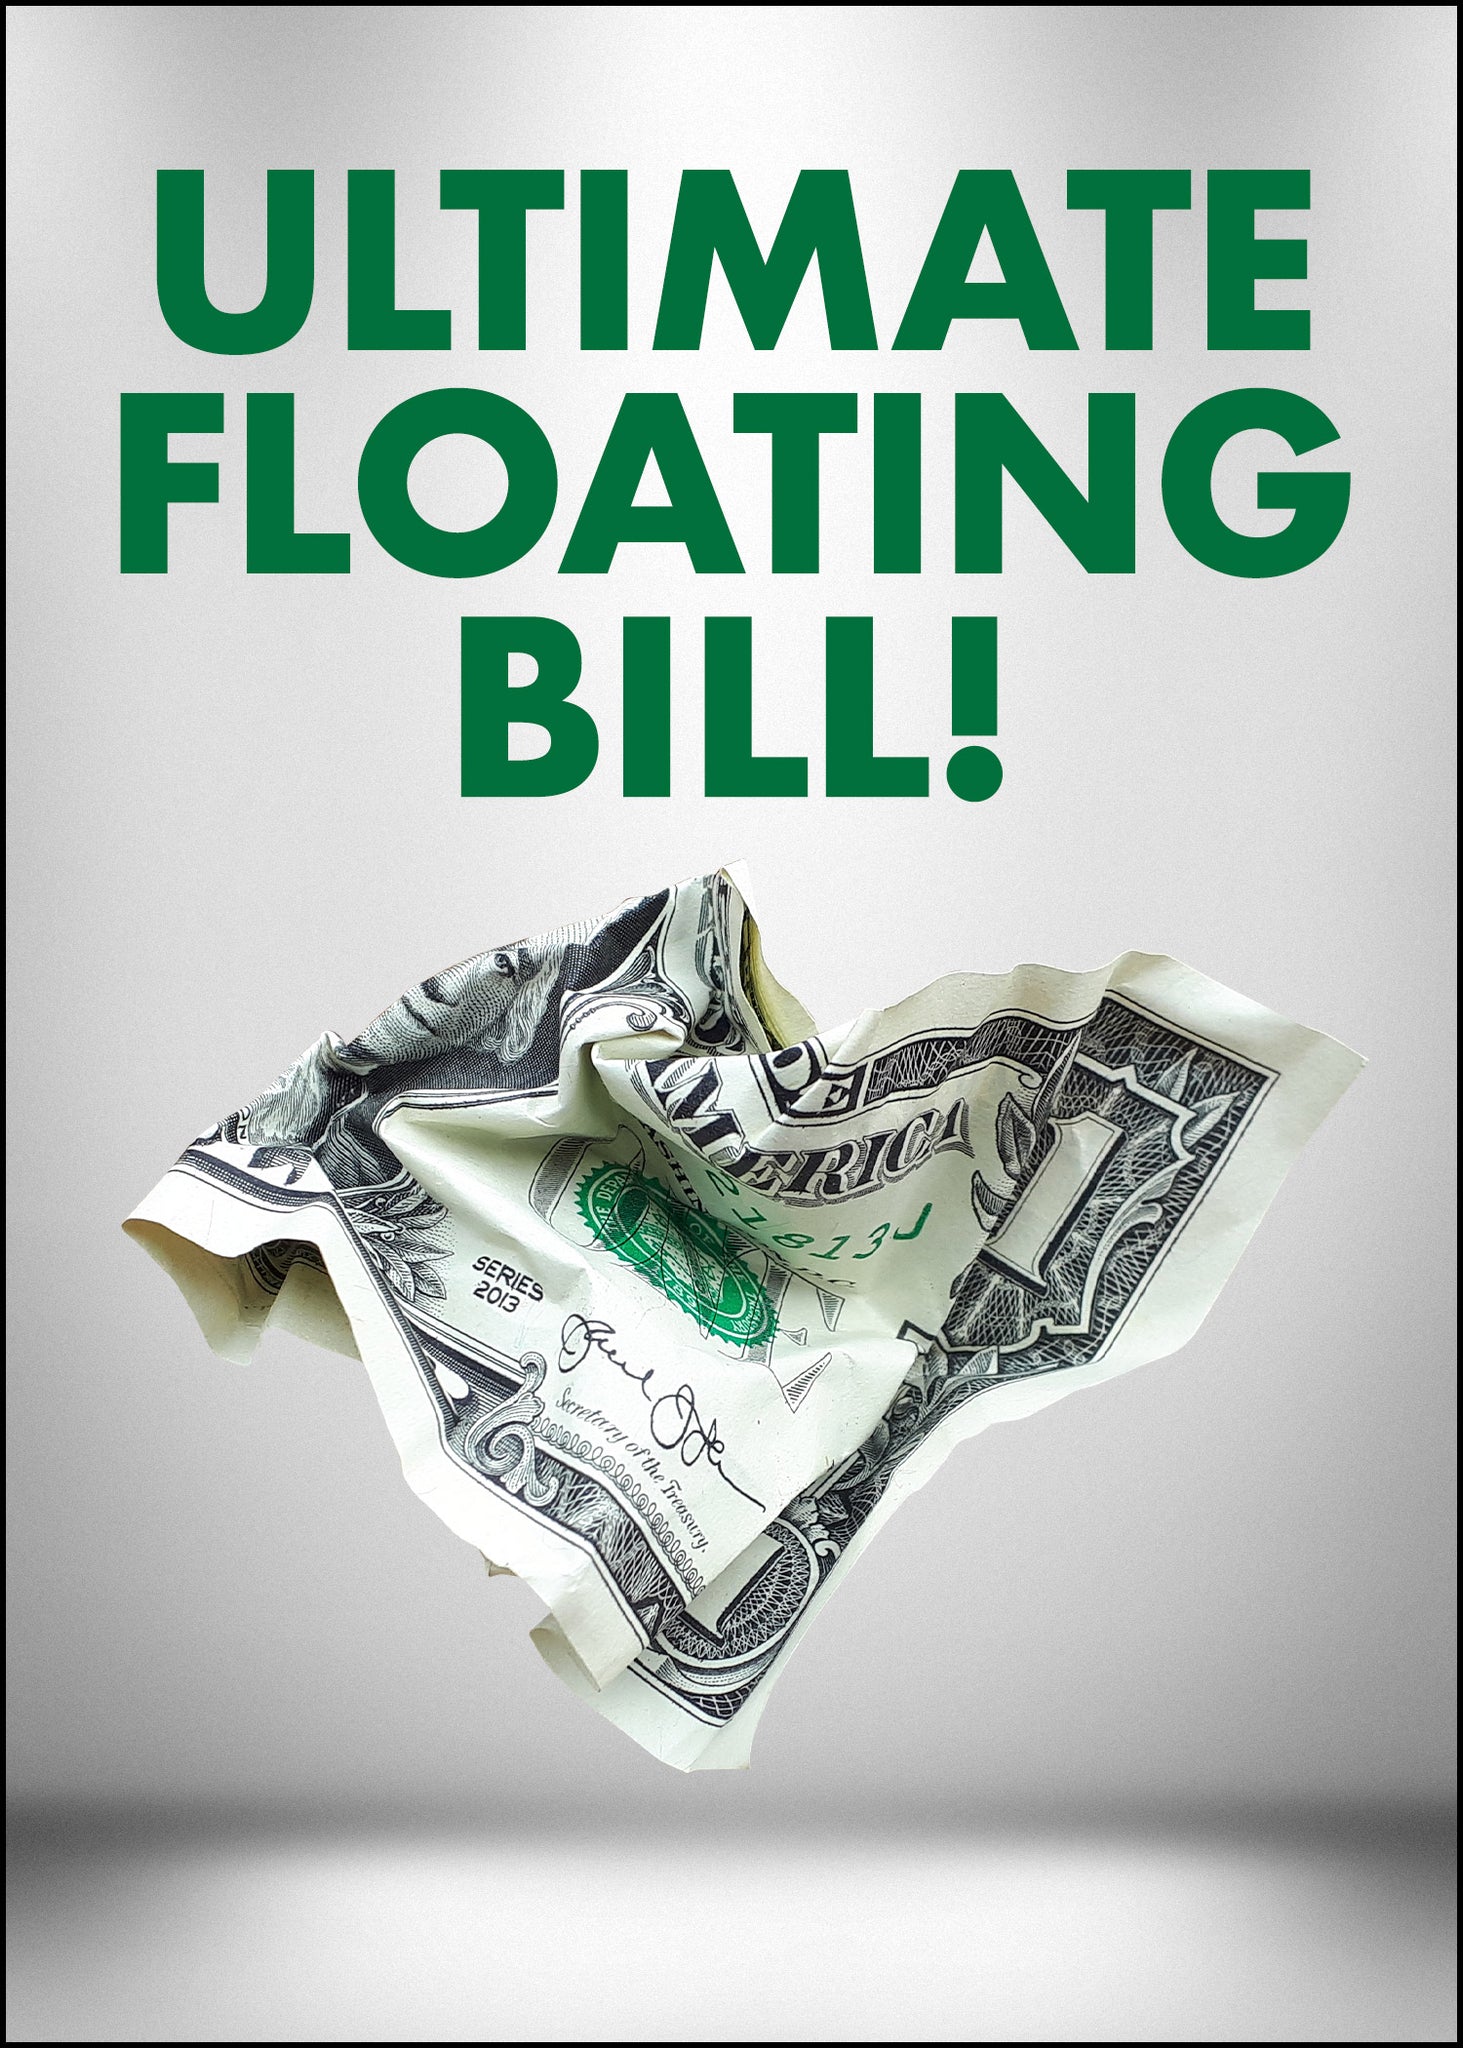 ULTIMATE FLOATING BILL